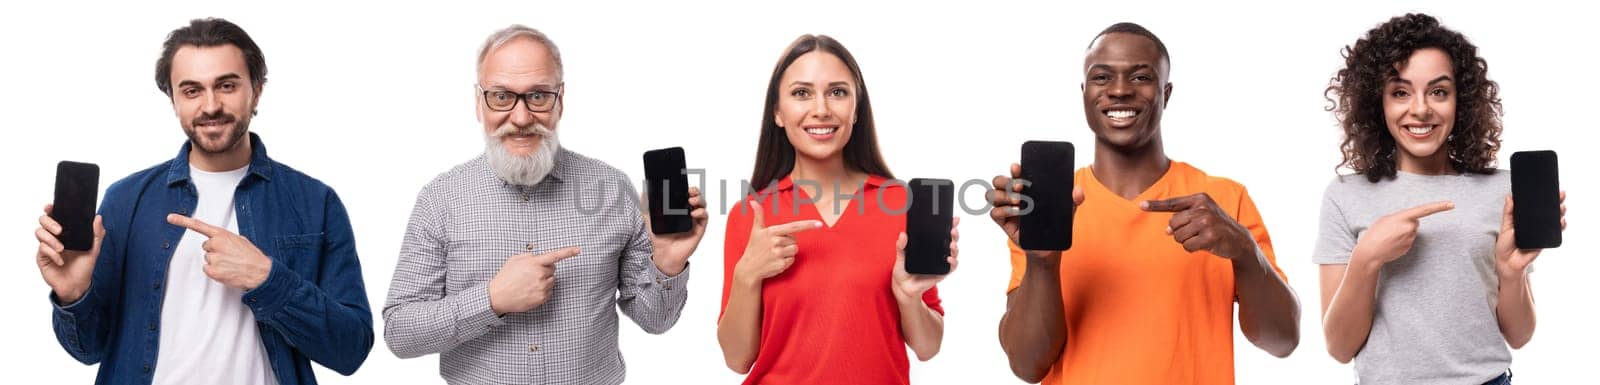 Group of men and women of different ages holding smartphones with mockup for advertising by TRMK